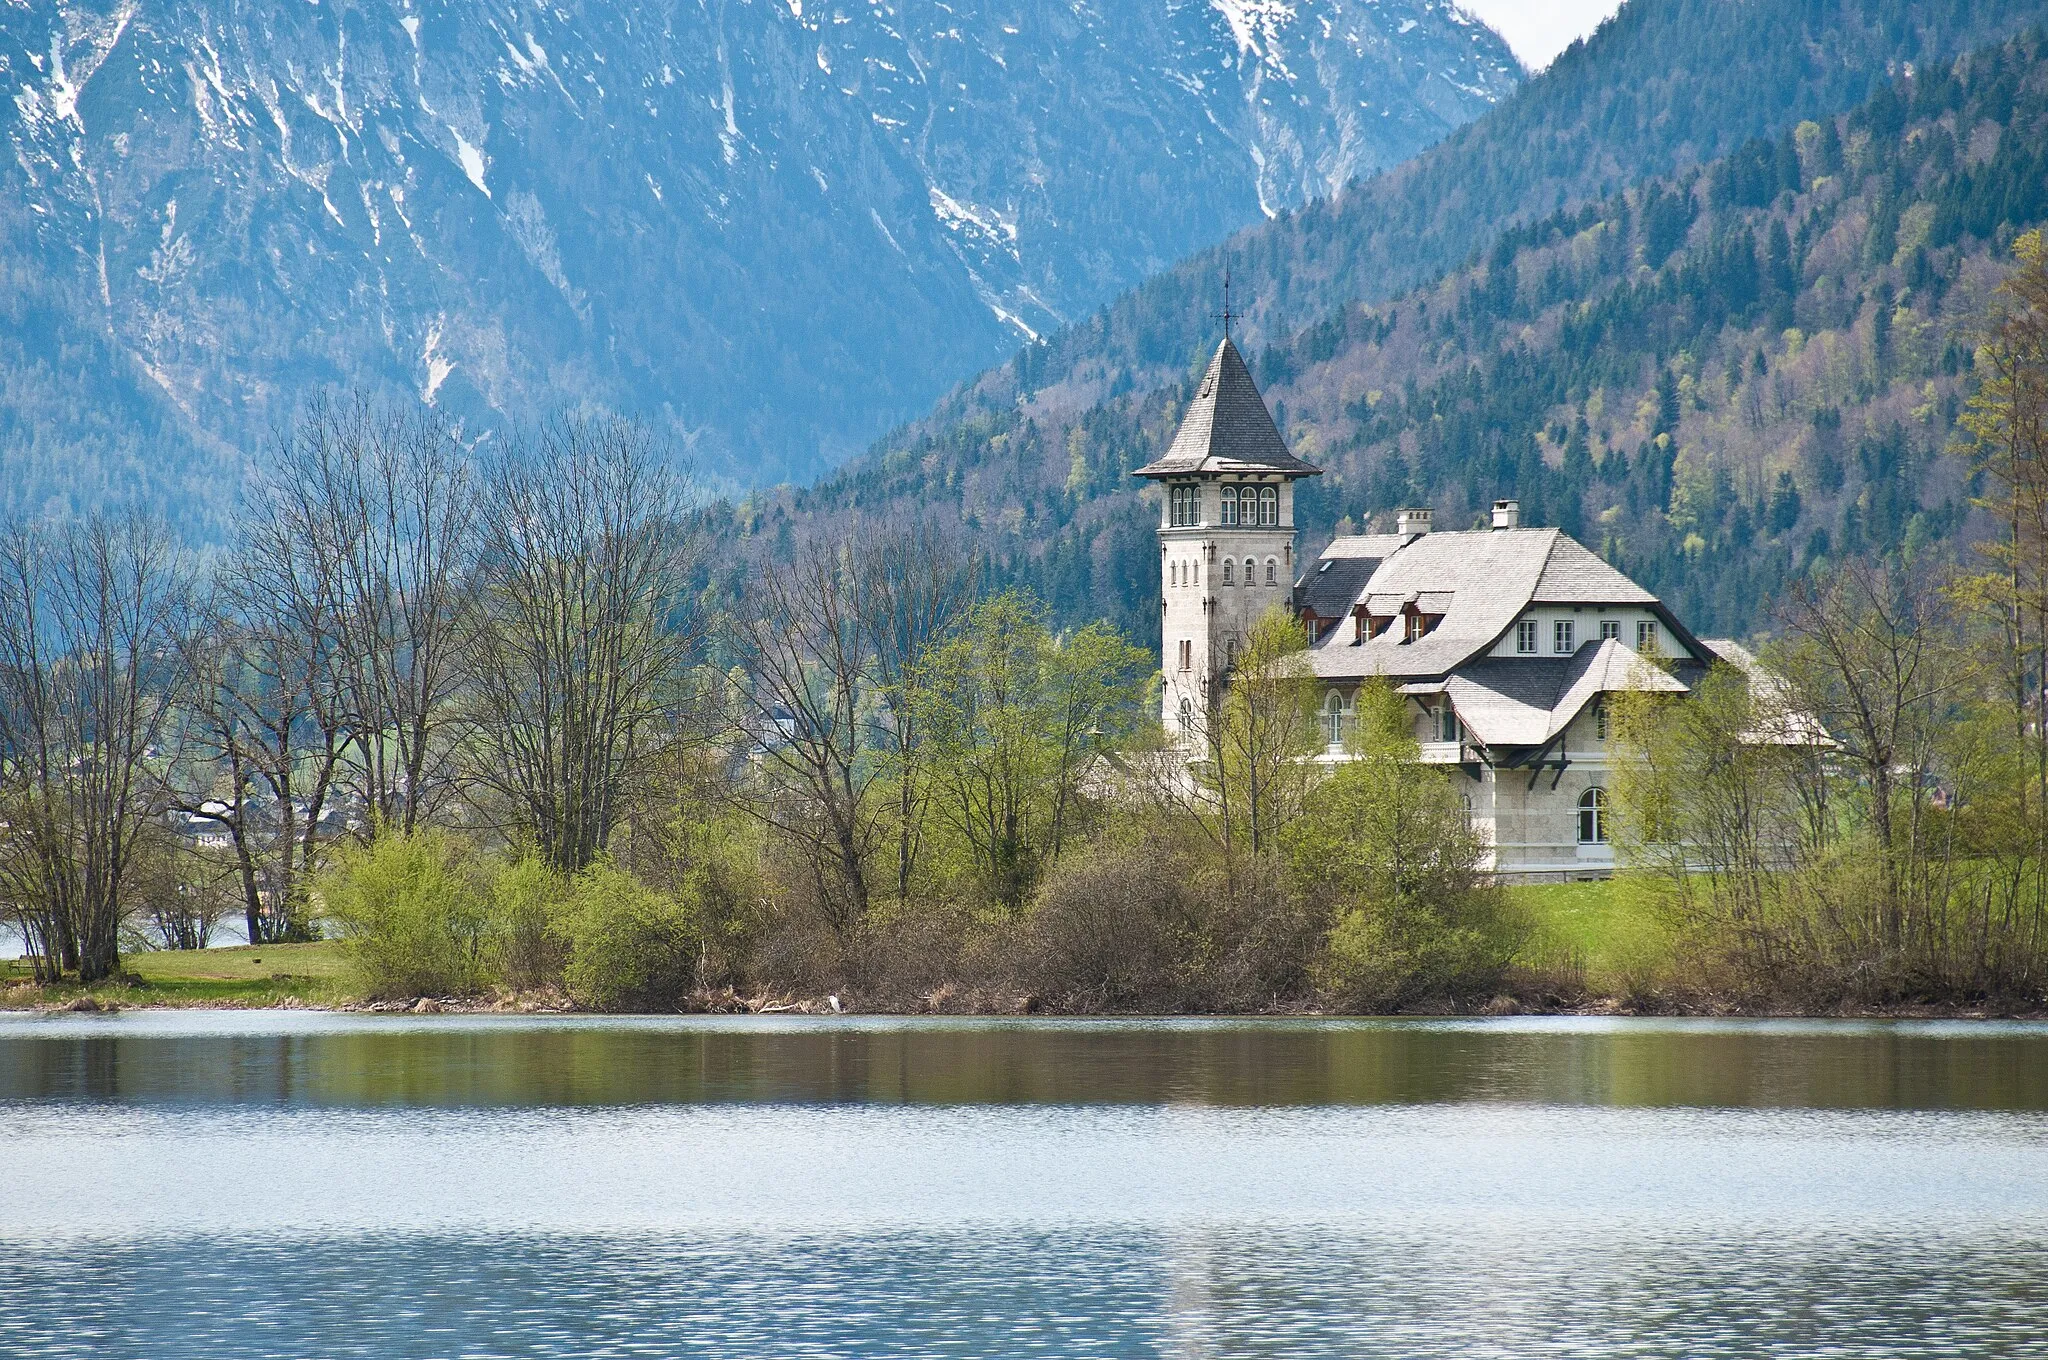 Photo showing: The Schloss Grundlsee at lake Grundlsee in Austria